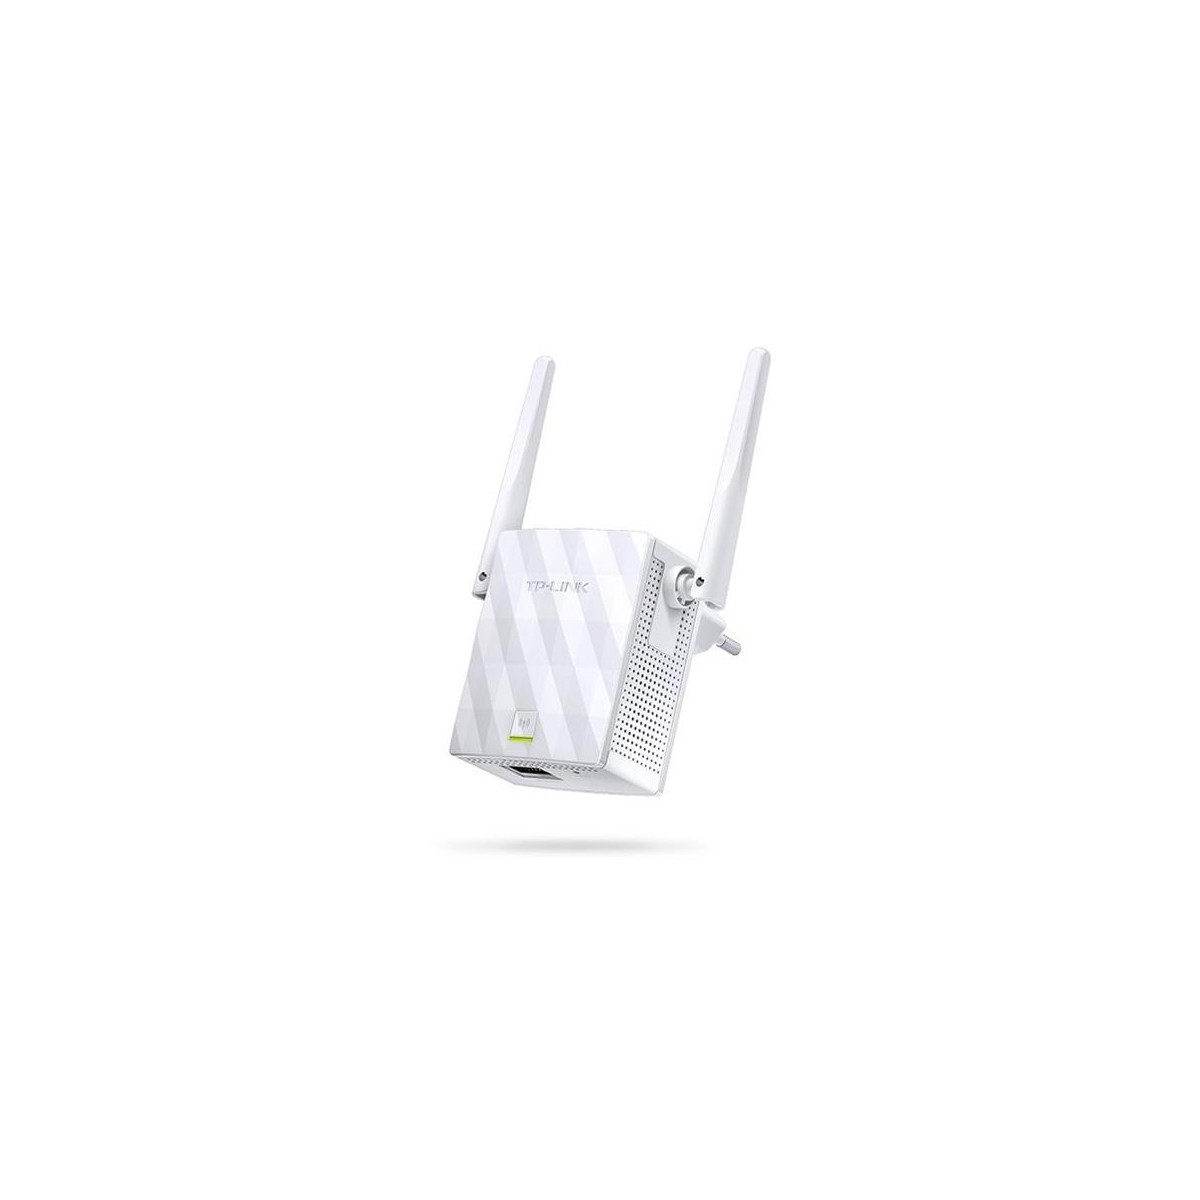 More about Repeater TP-LINK TL-WA855RE